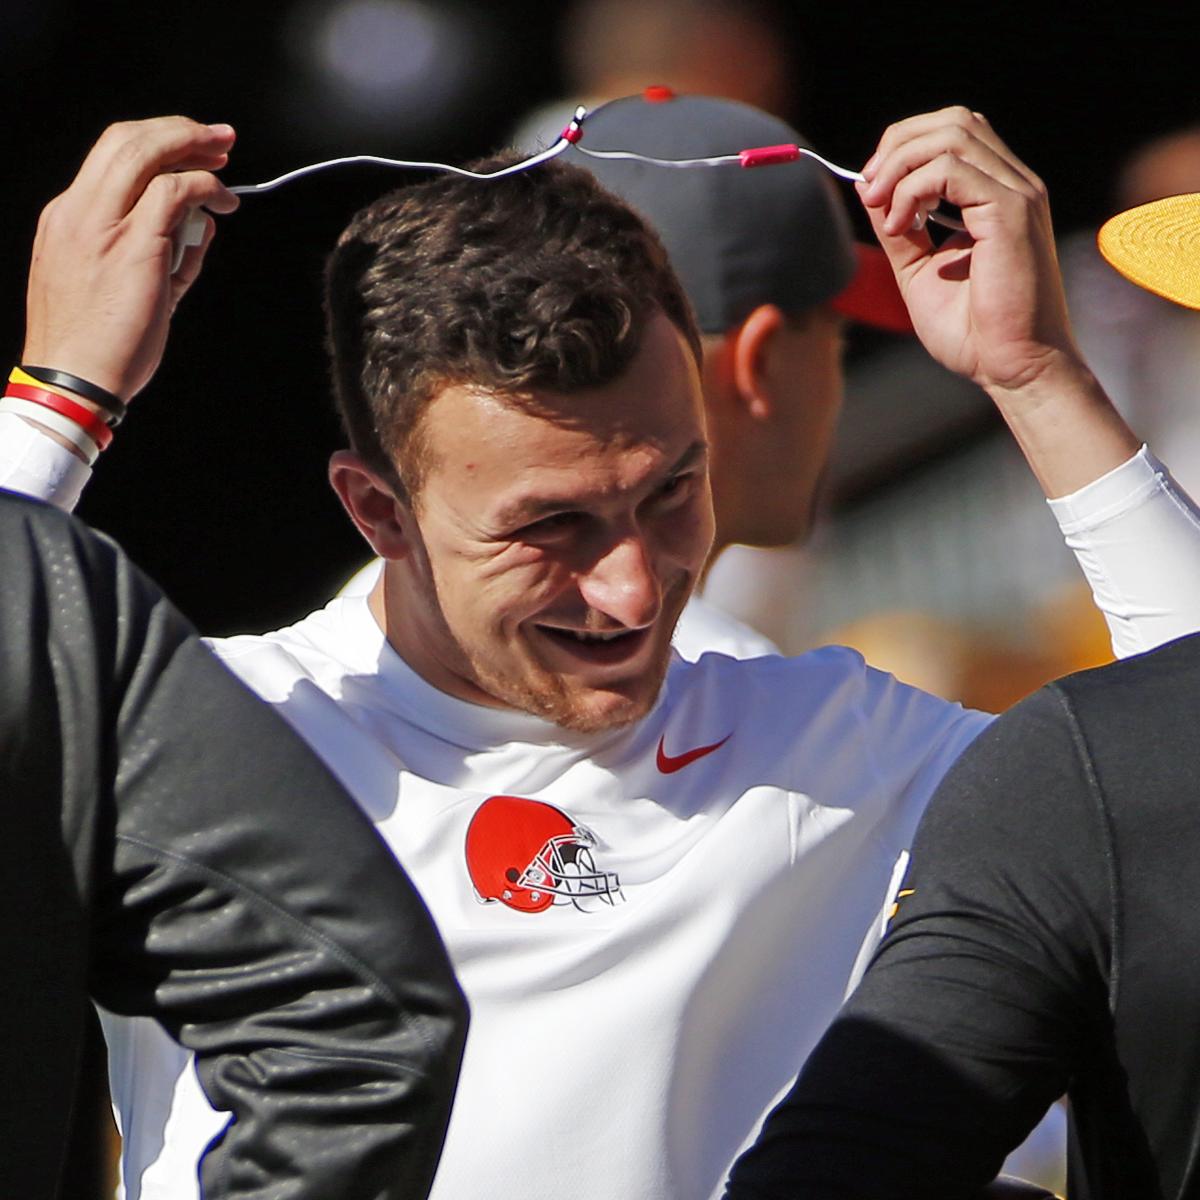 Benching Johnny Manziel Casts Doubt on QB's Future, Makes Big Problem for Browns